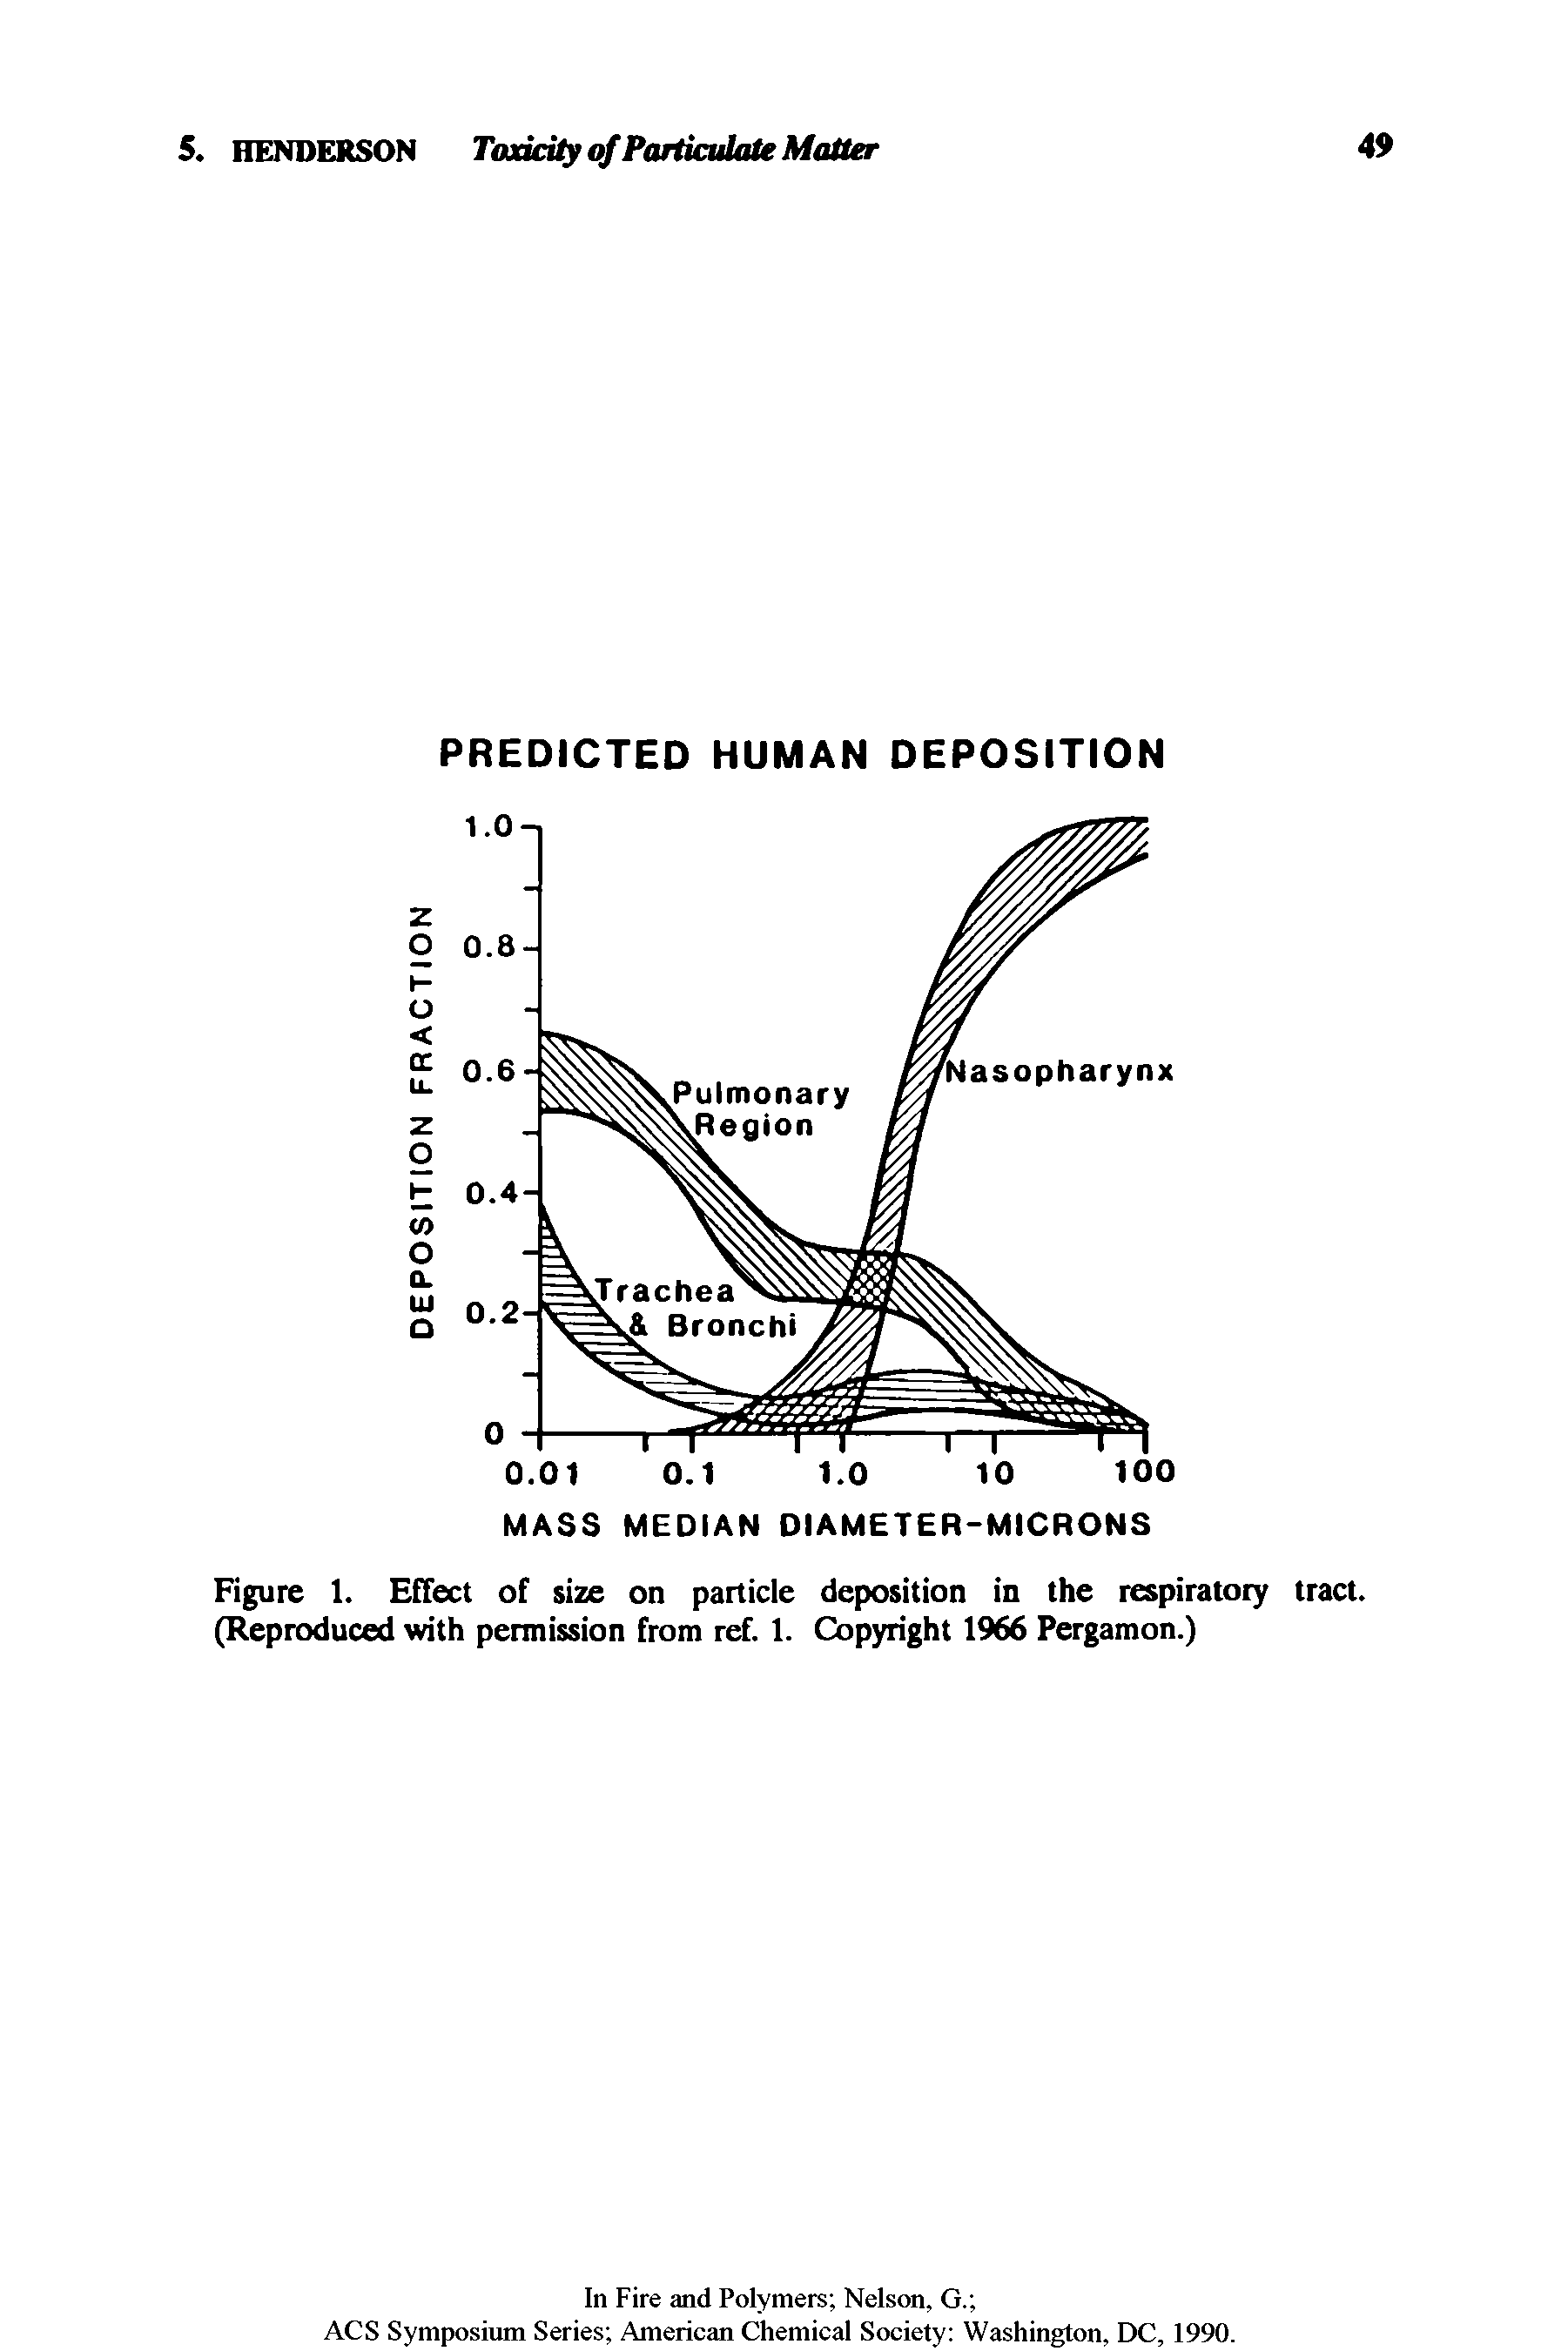 Figure 1. Effect of size on particle deposition in the respiratory tract. (Reproduced with permission from ref. 1. Copyright 1966 Pergamon.)...